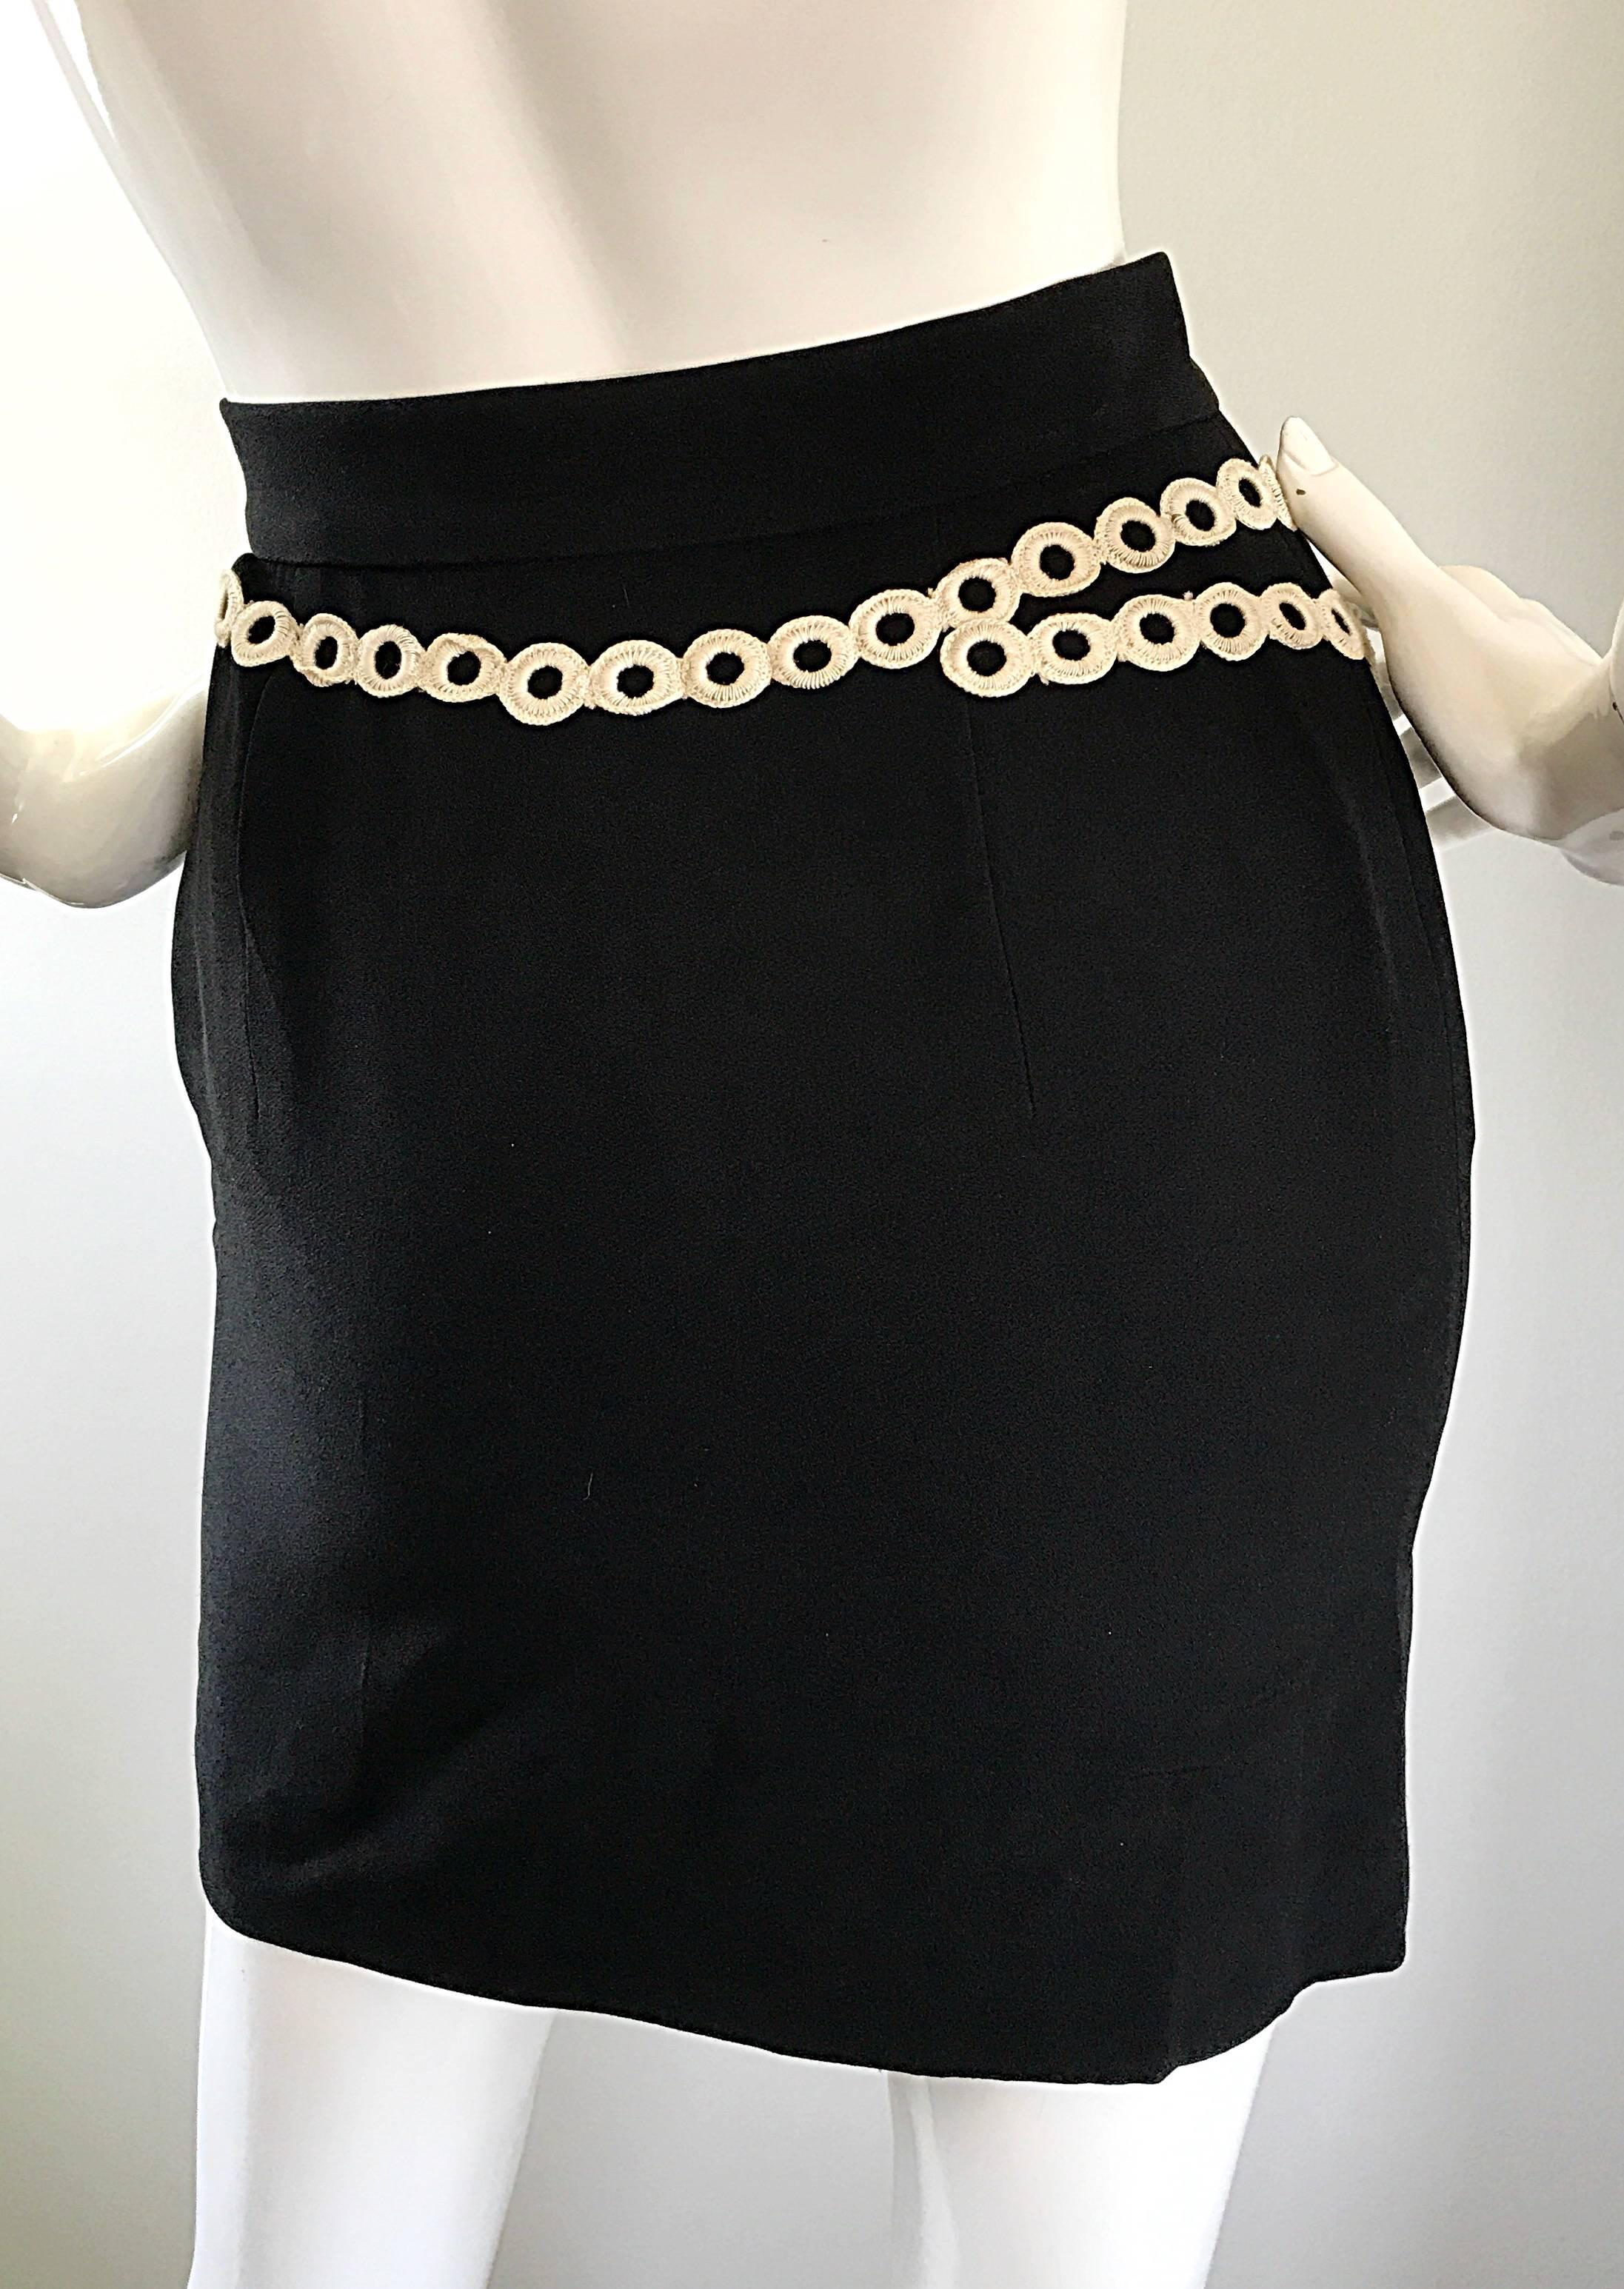 1990s Moschino Cheap and Chic Black and White Trompe l'oeil Vintage Mini Skirt For Sale 1